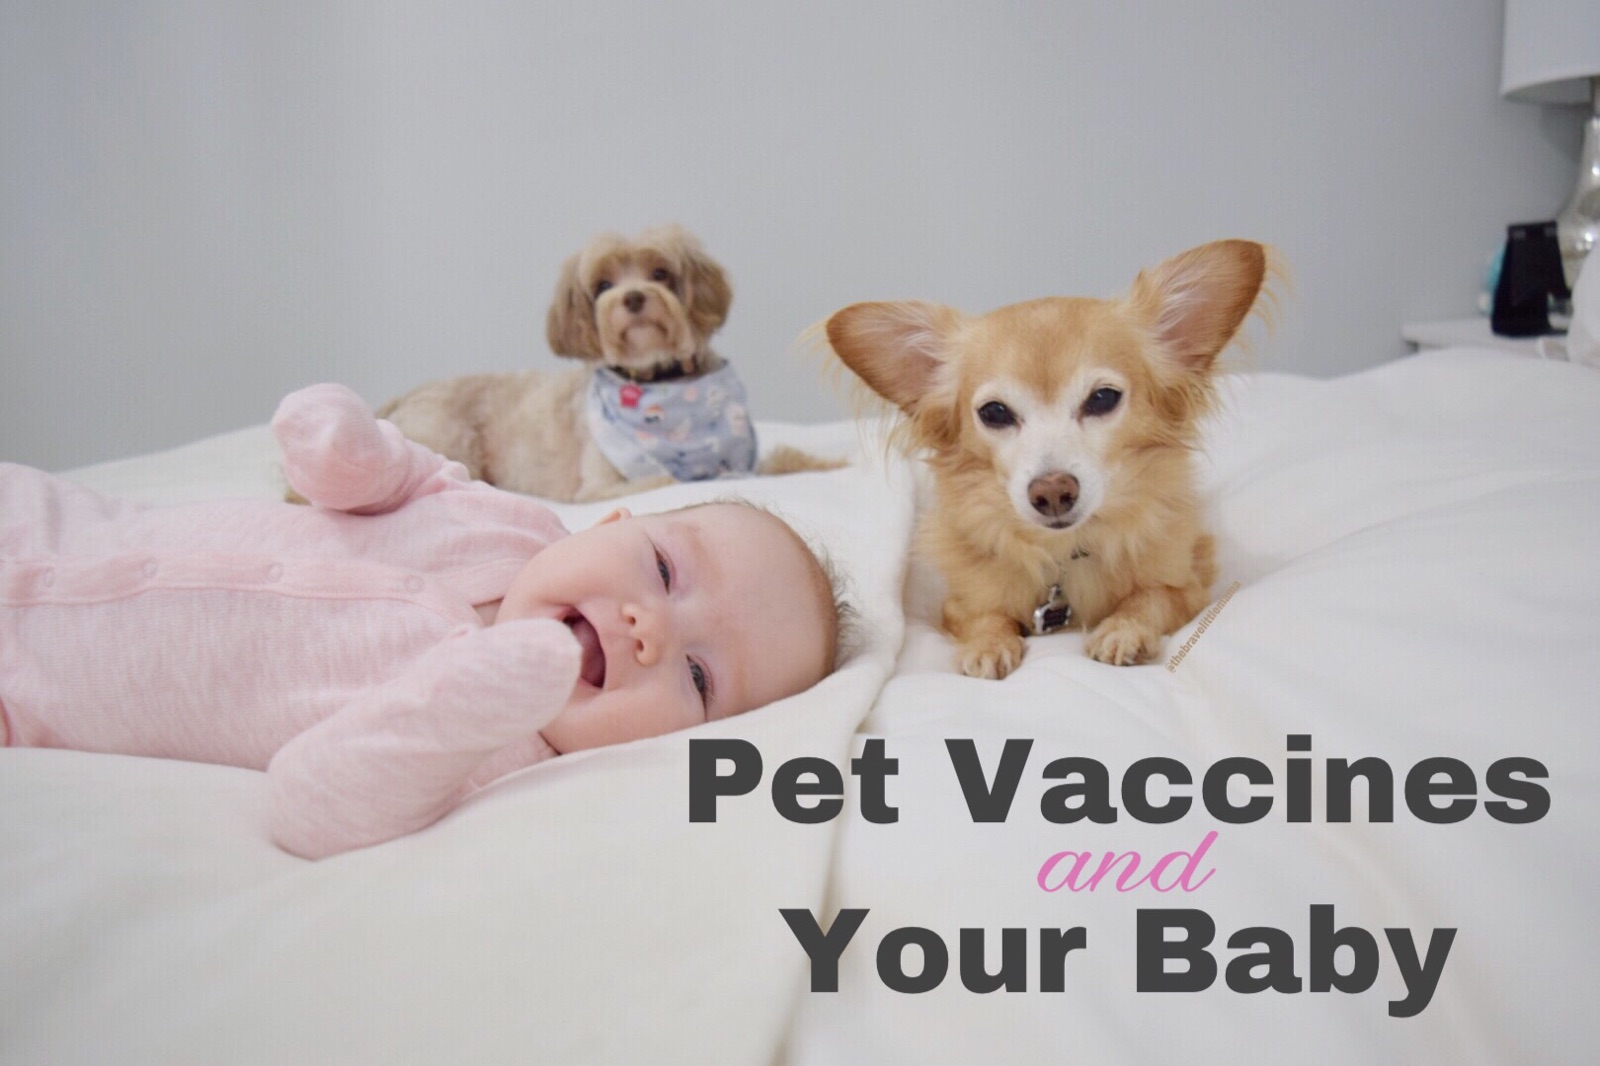 Pet Vaccines and Your Baby